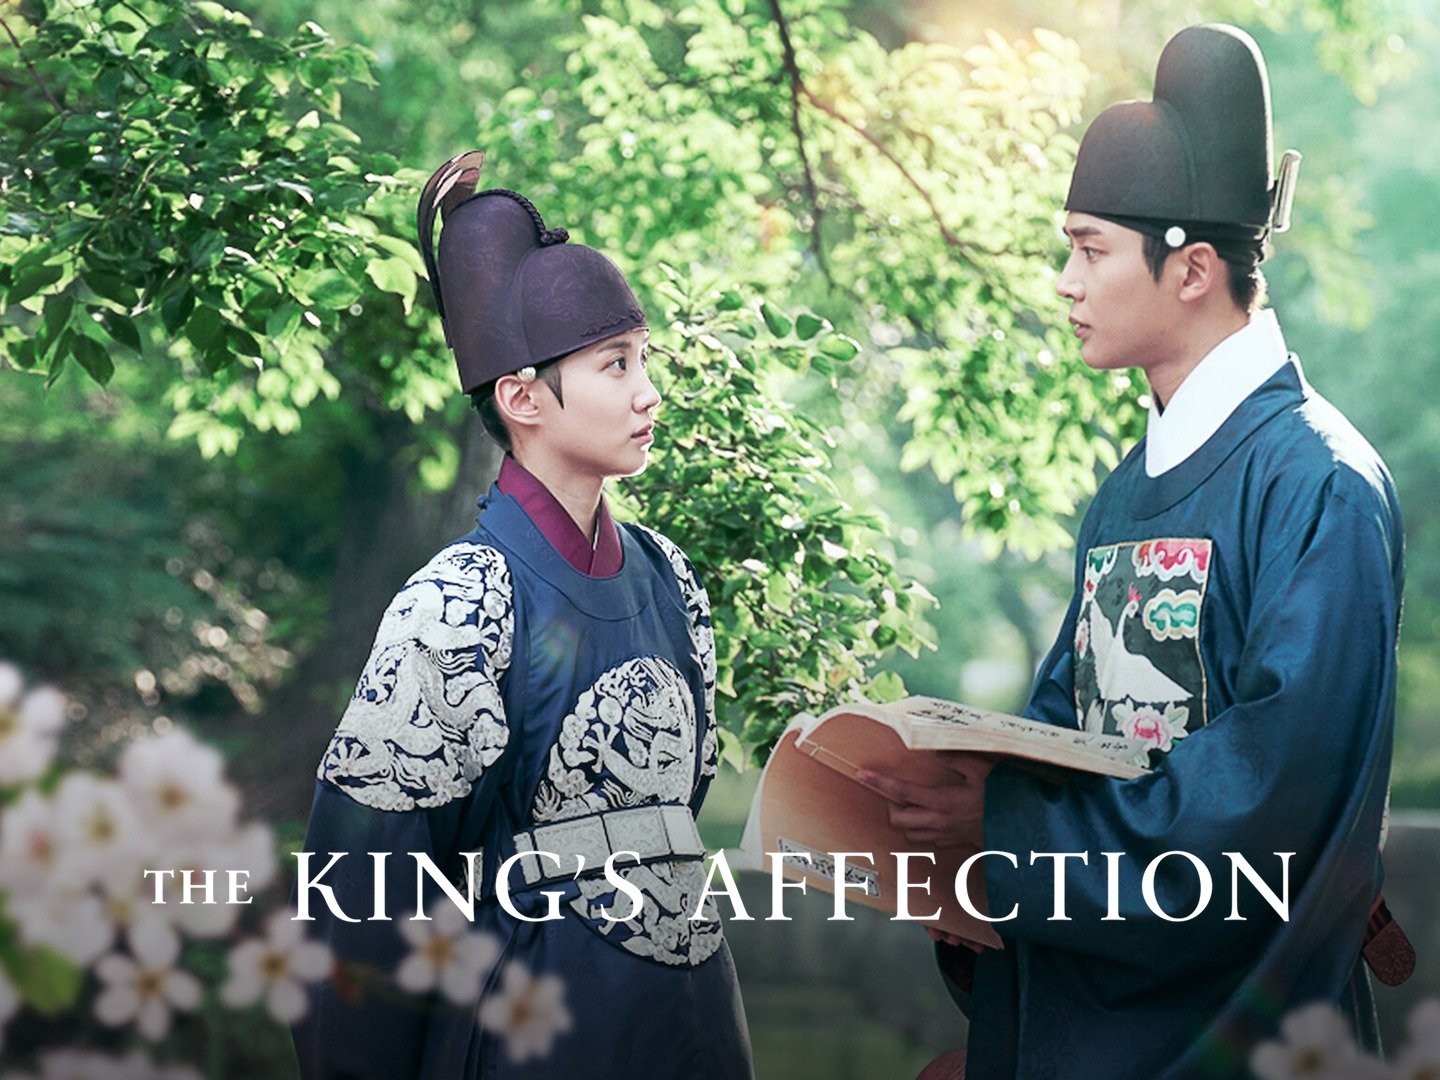 The King's Affection - Rotten Tomatoes